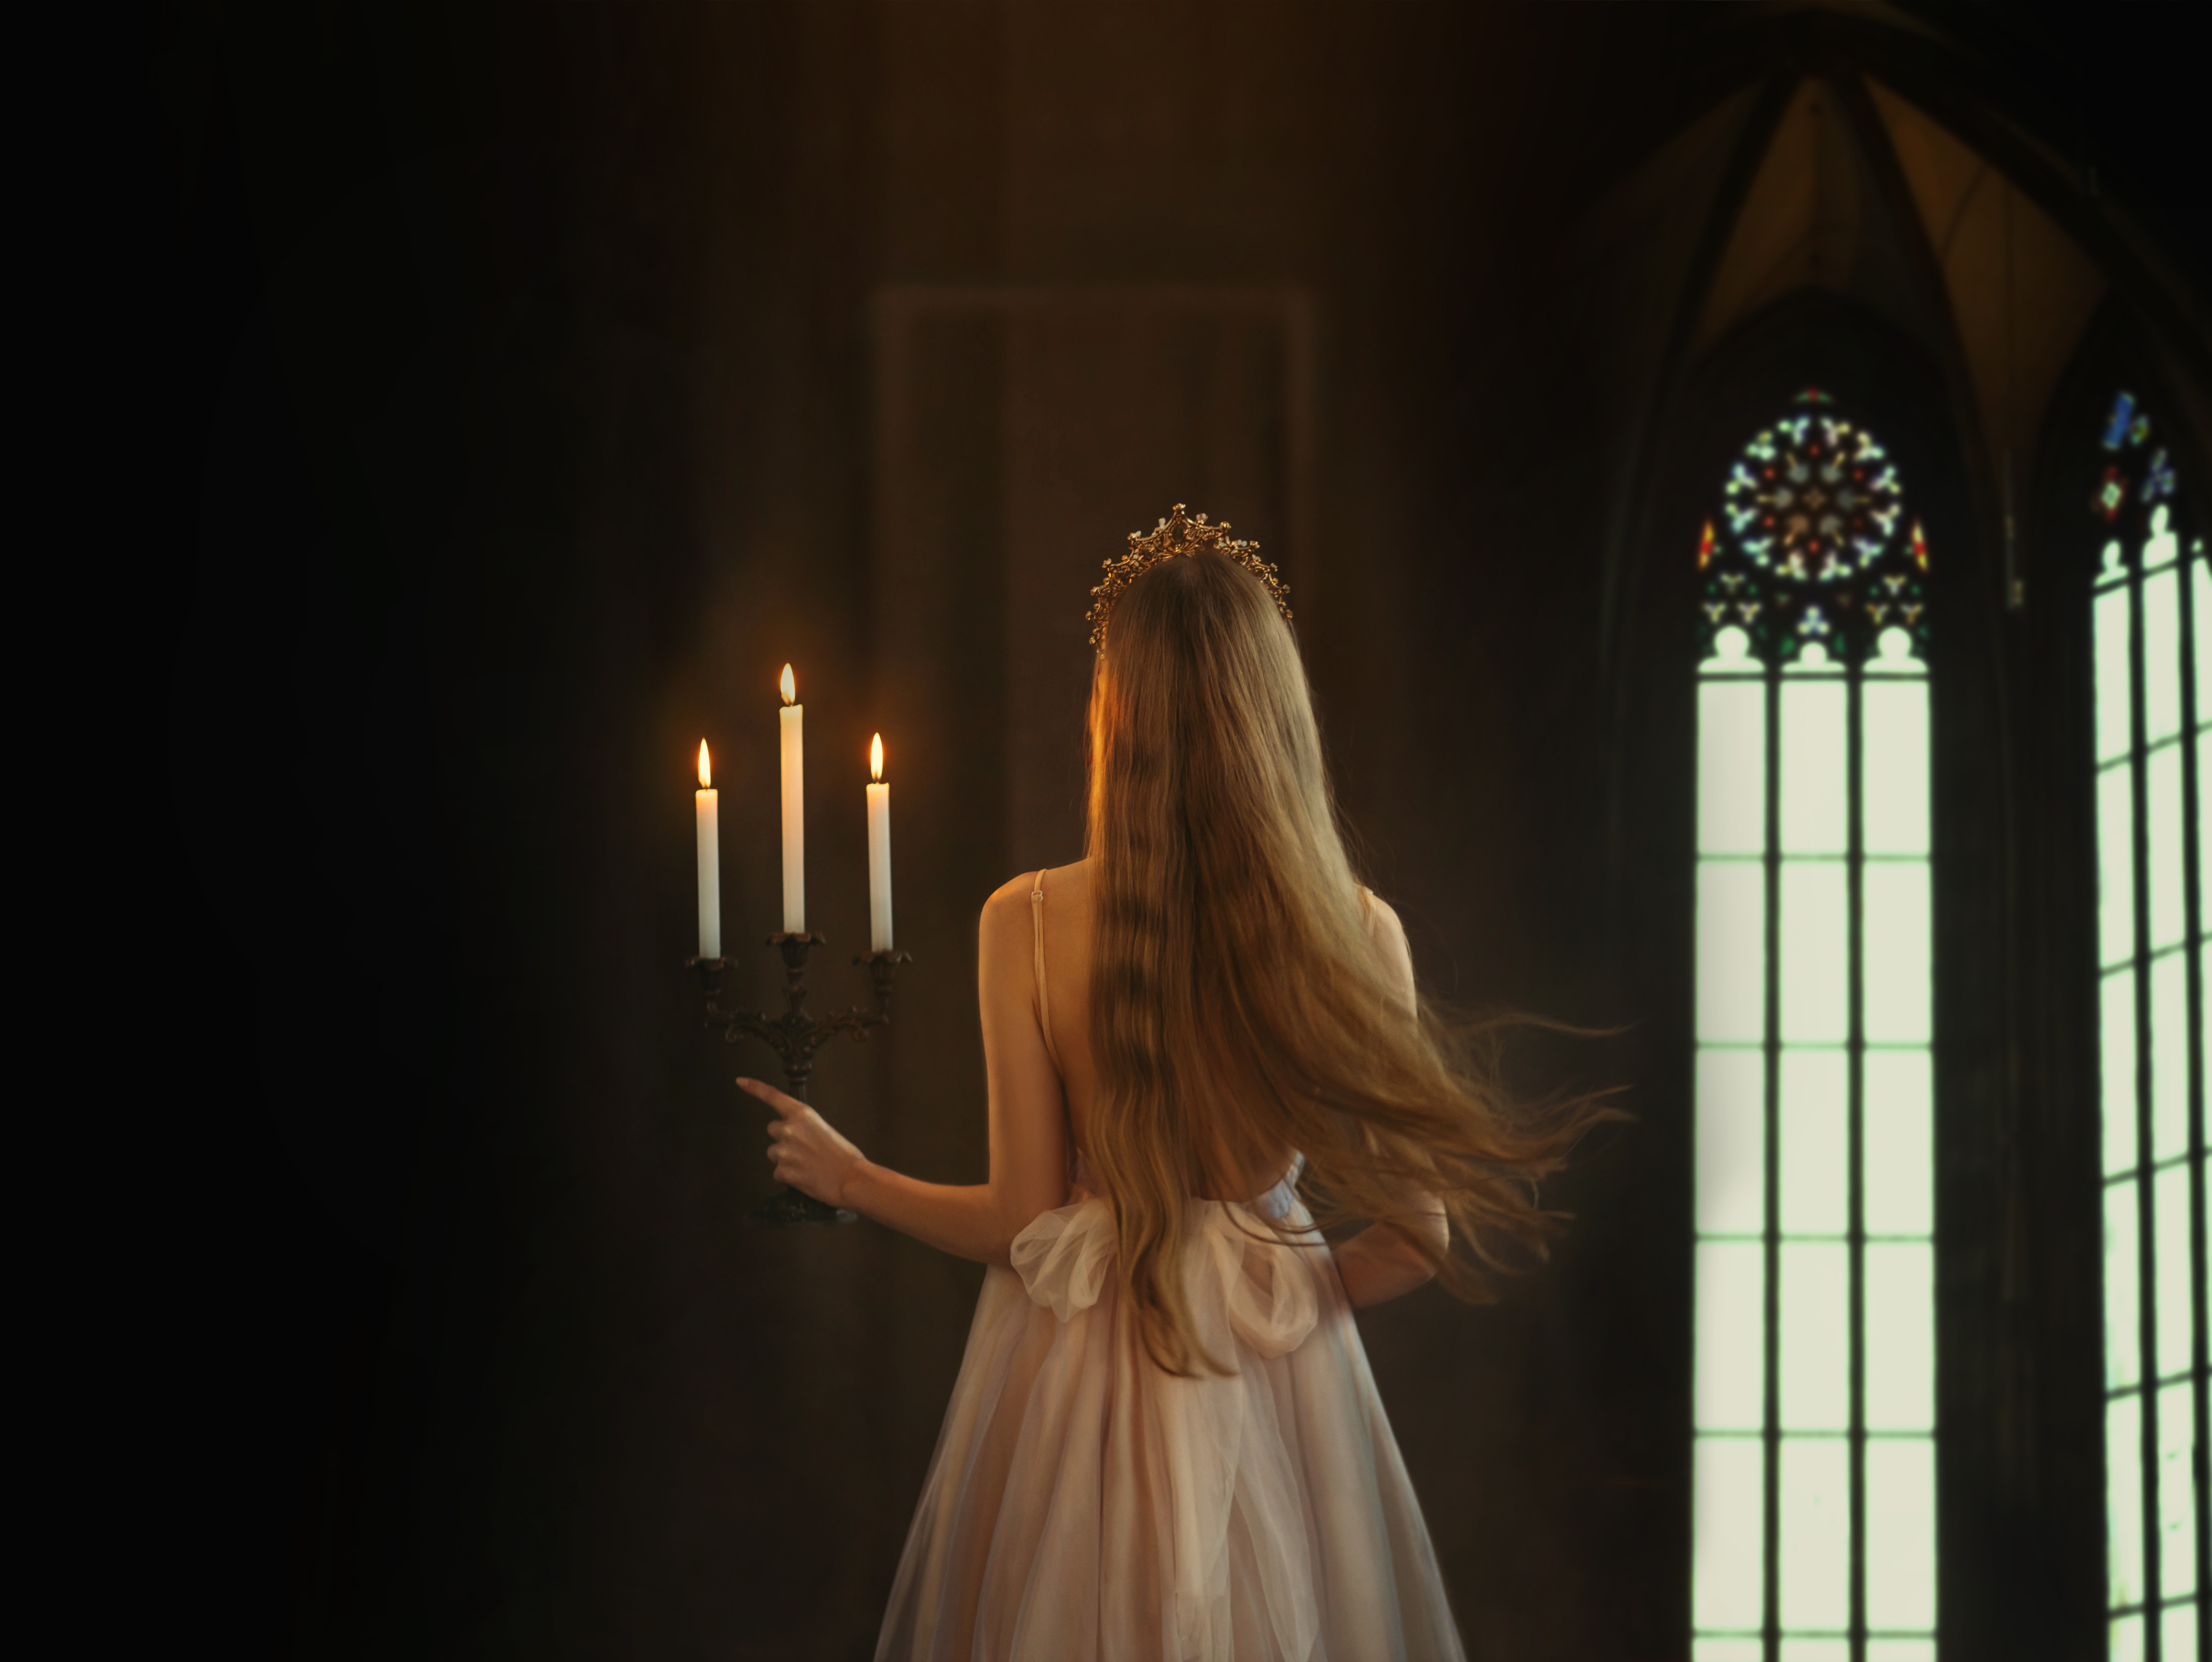 Mysterious art medieval girl princess walks in dark gothic room. Woman queen is holding candlestick with burning candles in hand. 